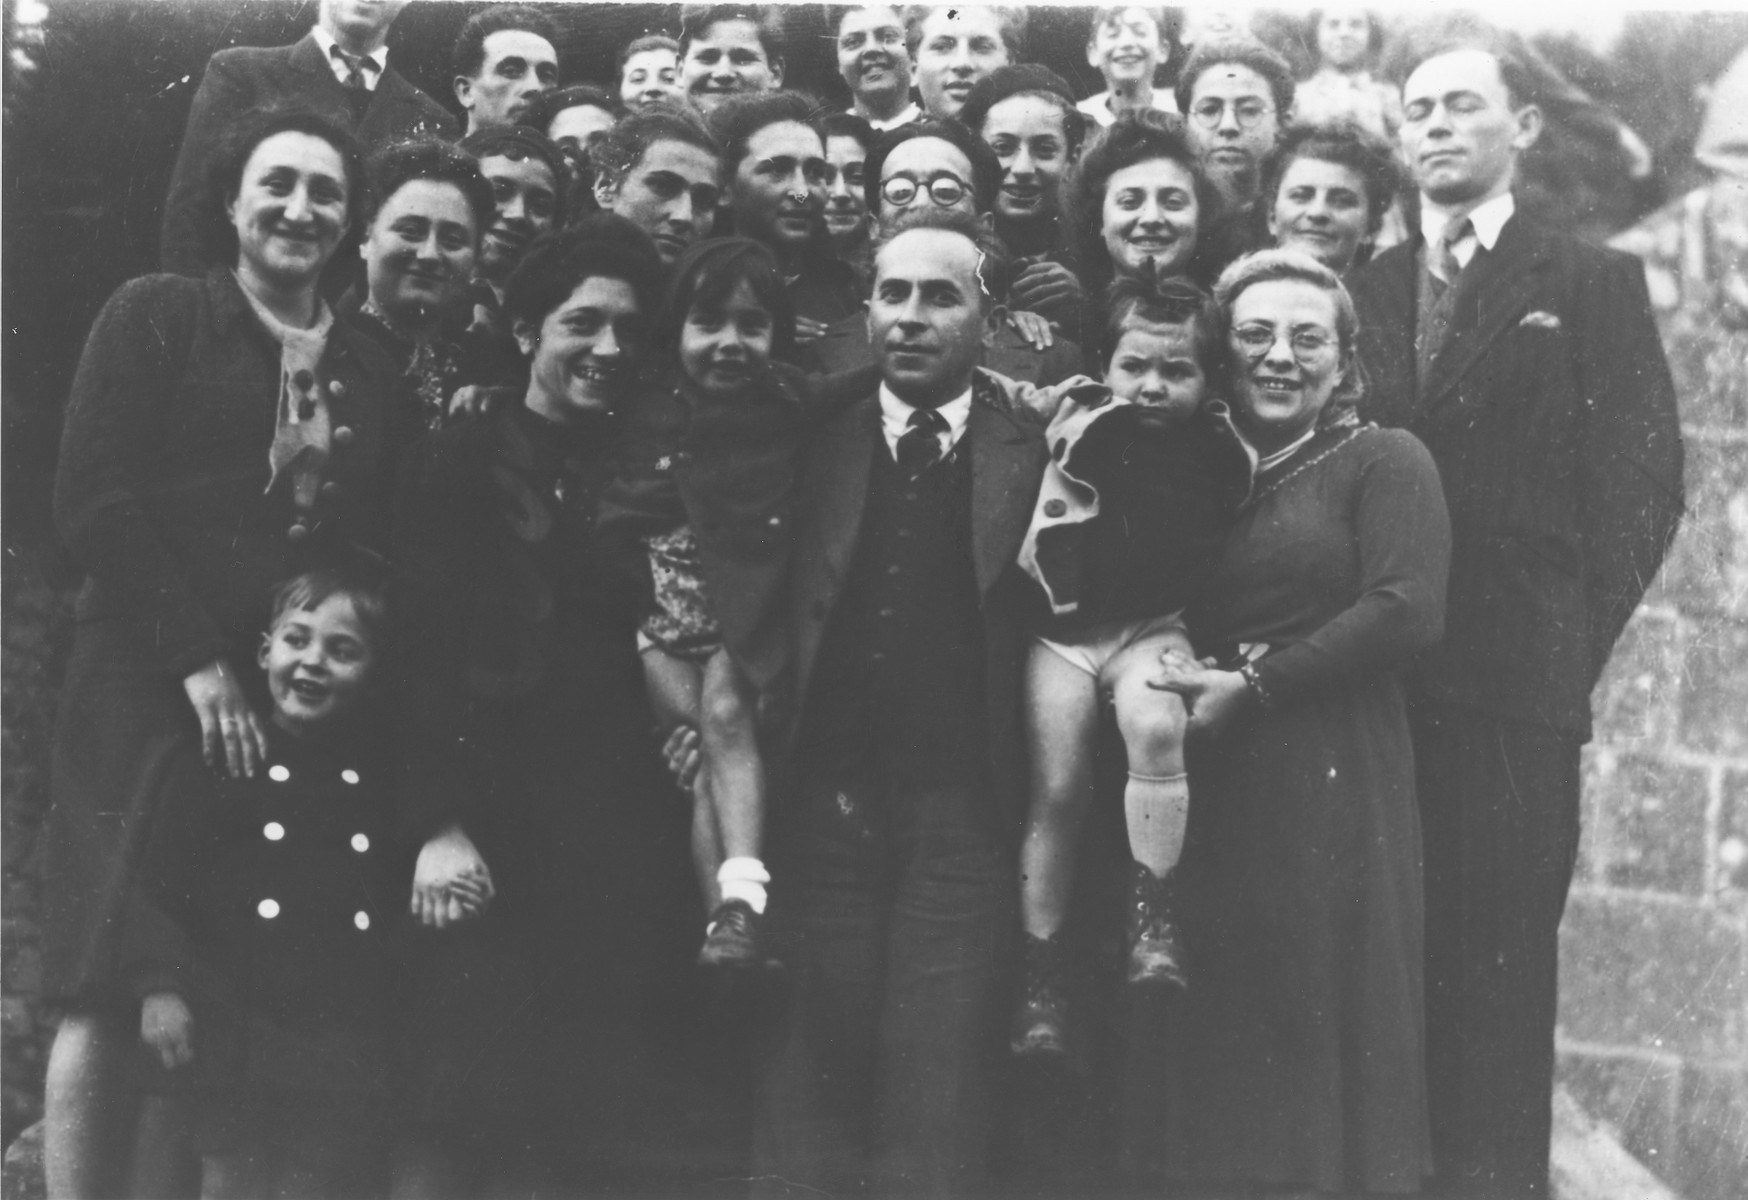 Group portrait of the children and staff of the OSE (Oeuvre de Secours aux Enfants) children's home in Masgelier.

Among those pictured are Hans Hirschberg, Dr. and Gertrude Blumenstock, Kurt Leuchter, Theo Brenig and Isidor and Louba Pudermacher, Boris, Luba and Isidor.